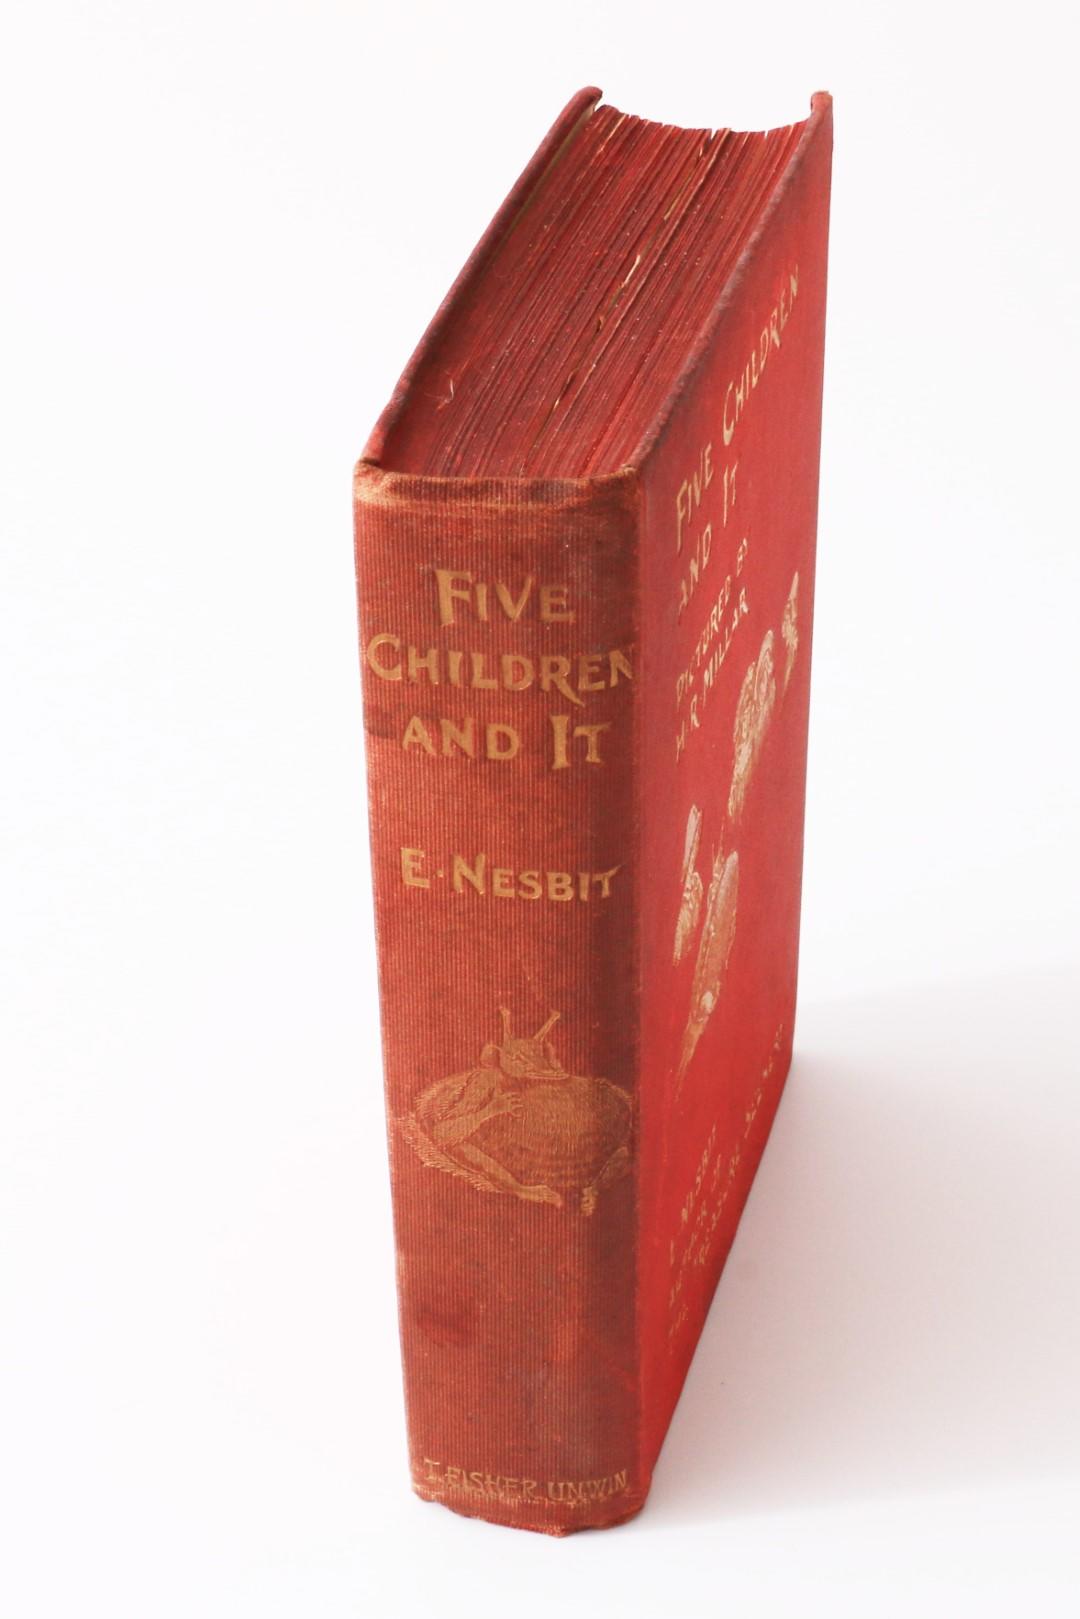 Edith Nesbit - Five Children and It - T. Fisher Unwin, 1902, First Edition.